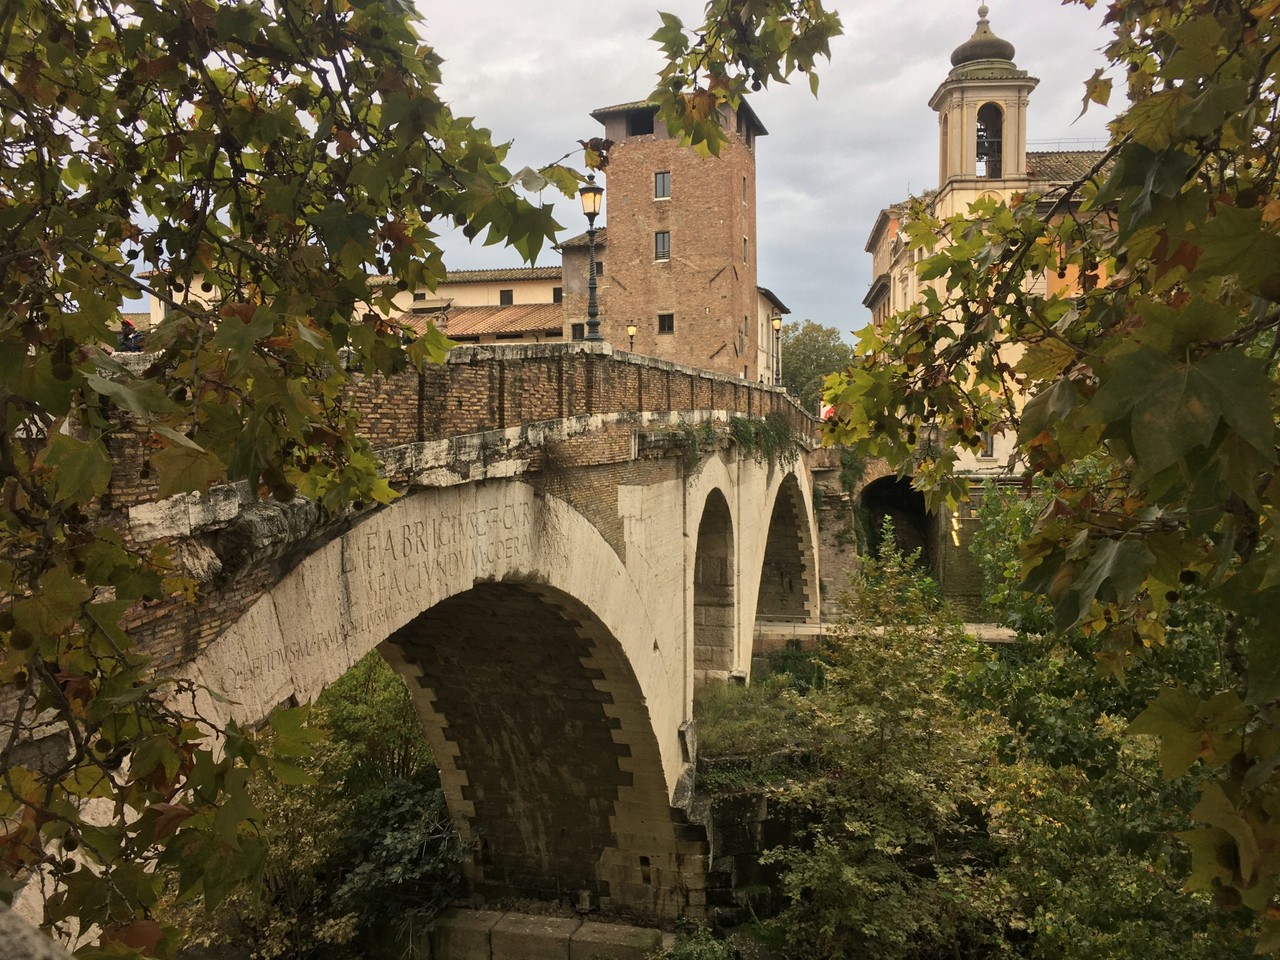 K Syndrome on the Tiber Island